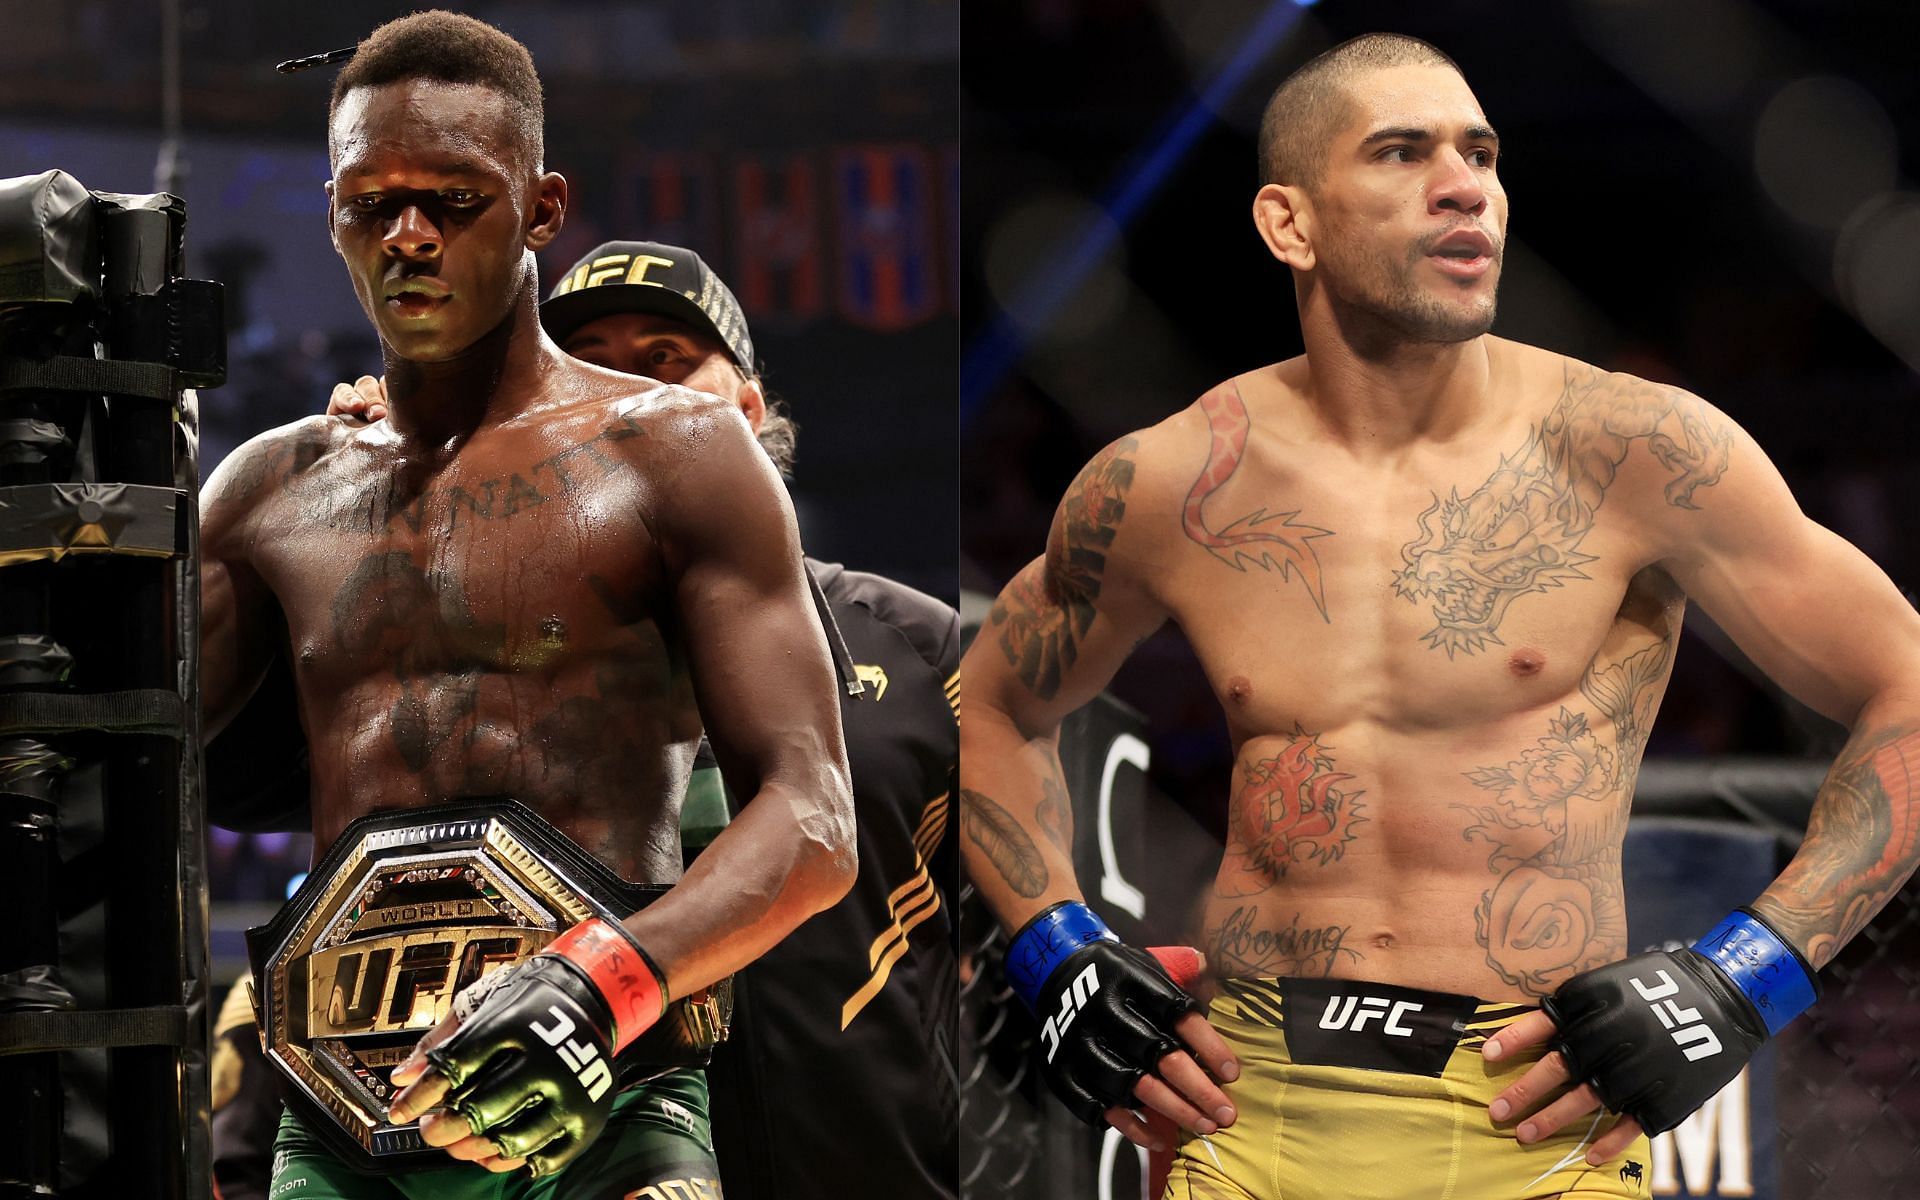 Israel Adesanya (left) and Alex Pereira (right) (Image credits Getty Images)